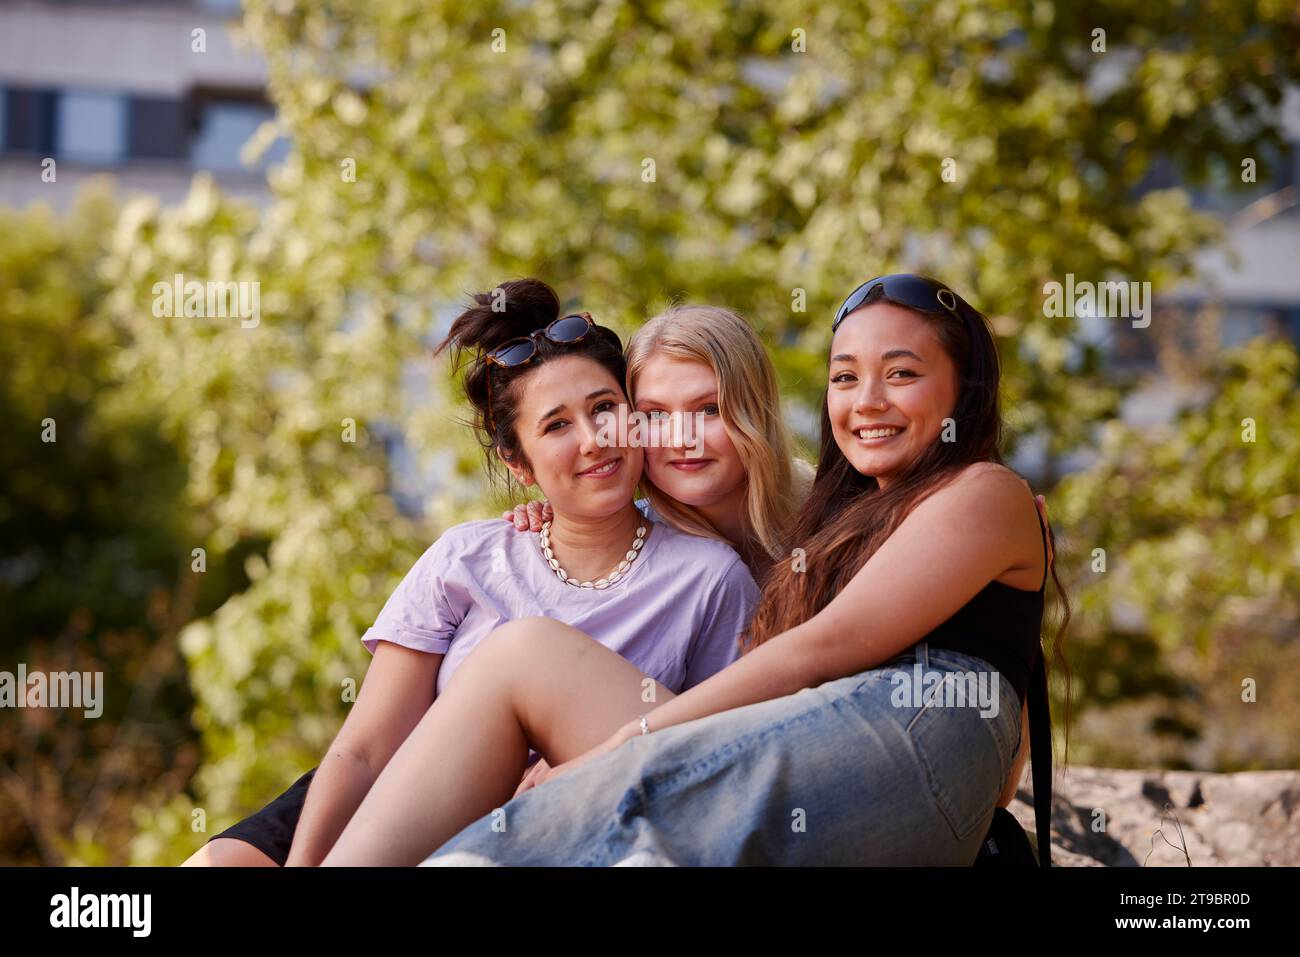 Three young female friends sitting together and looking at camera Stock Photo